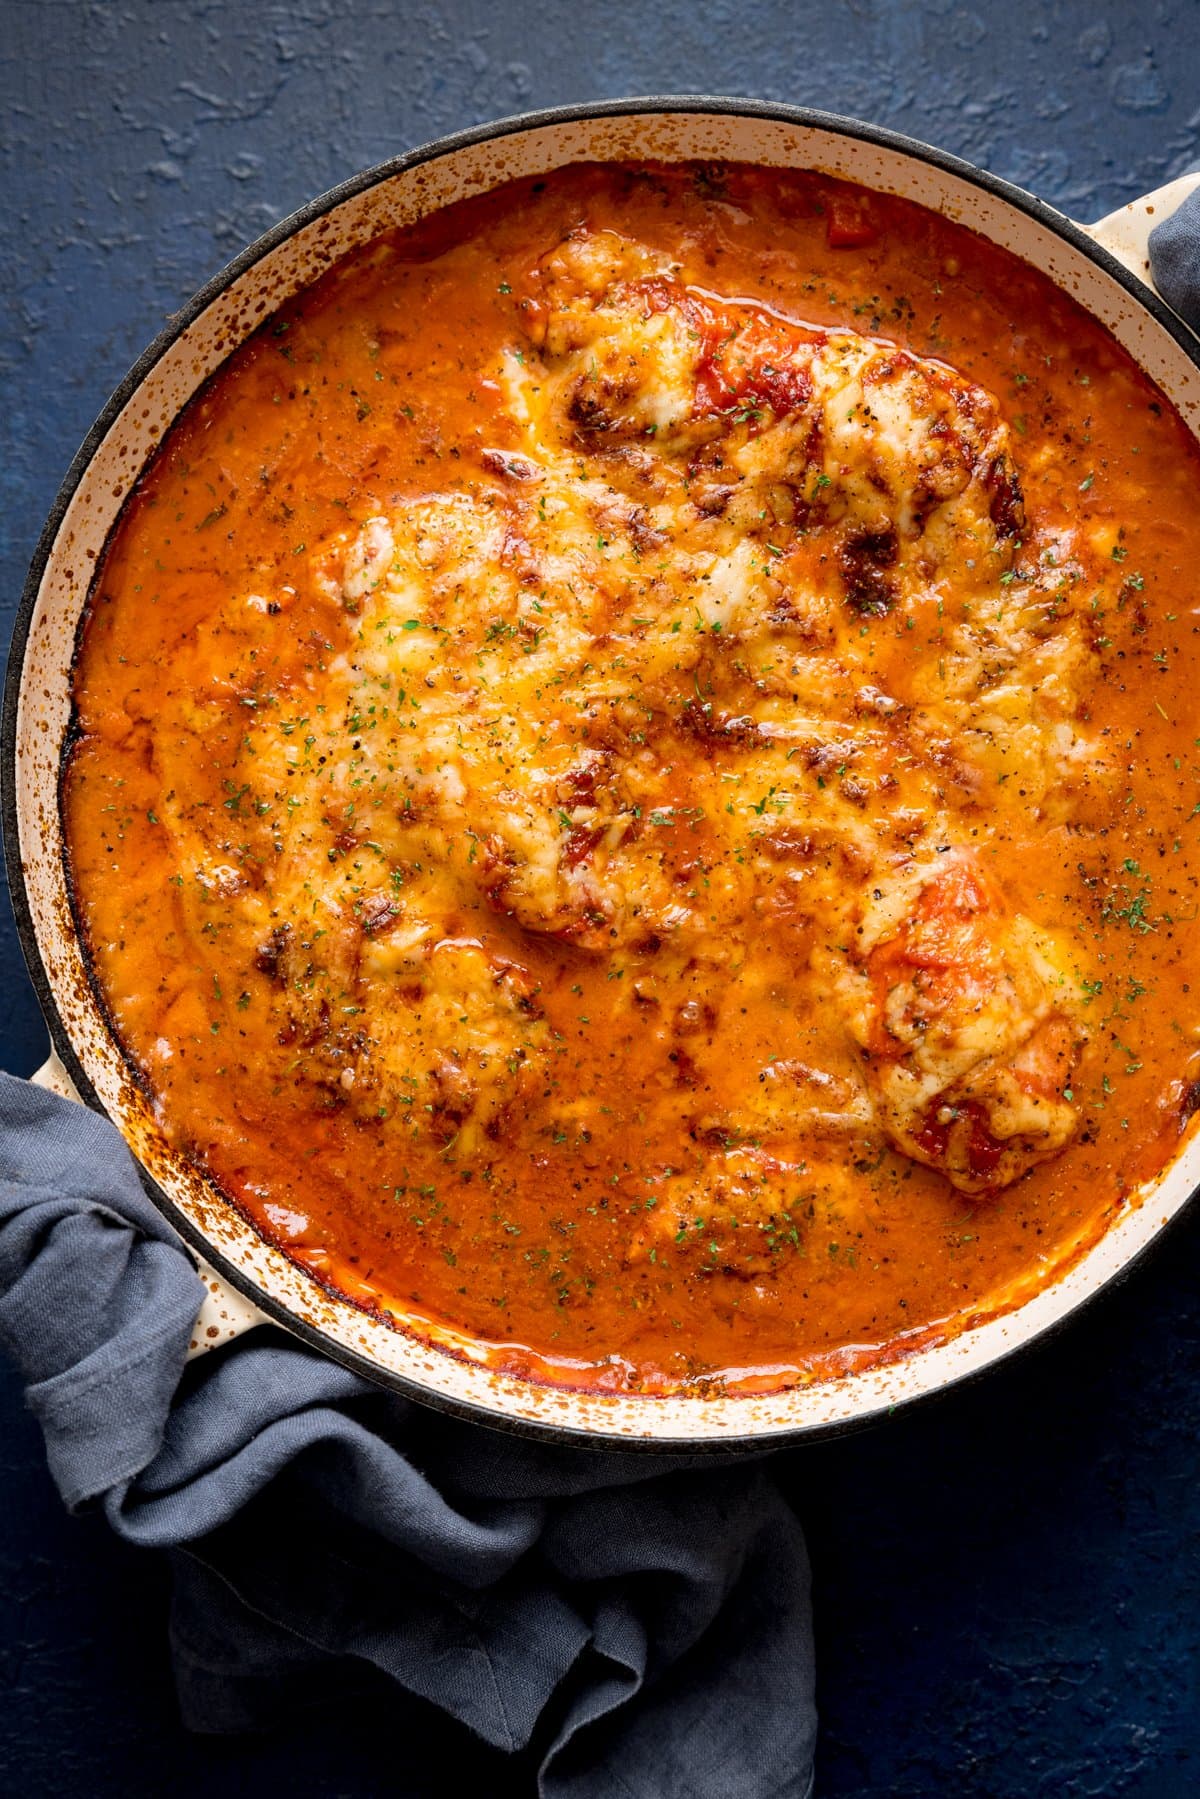 Overhead image of lasagne-style chicken bake in a large pan on a blue background.